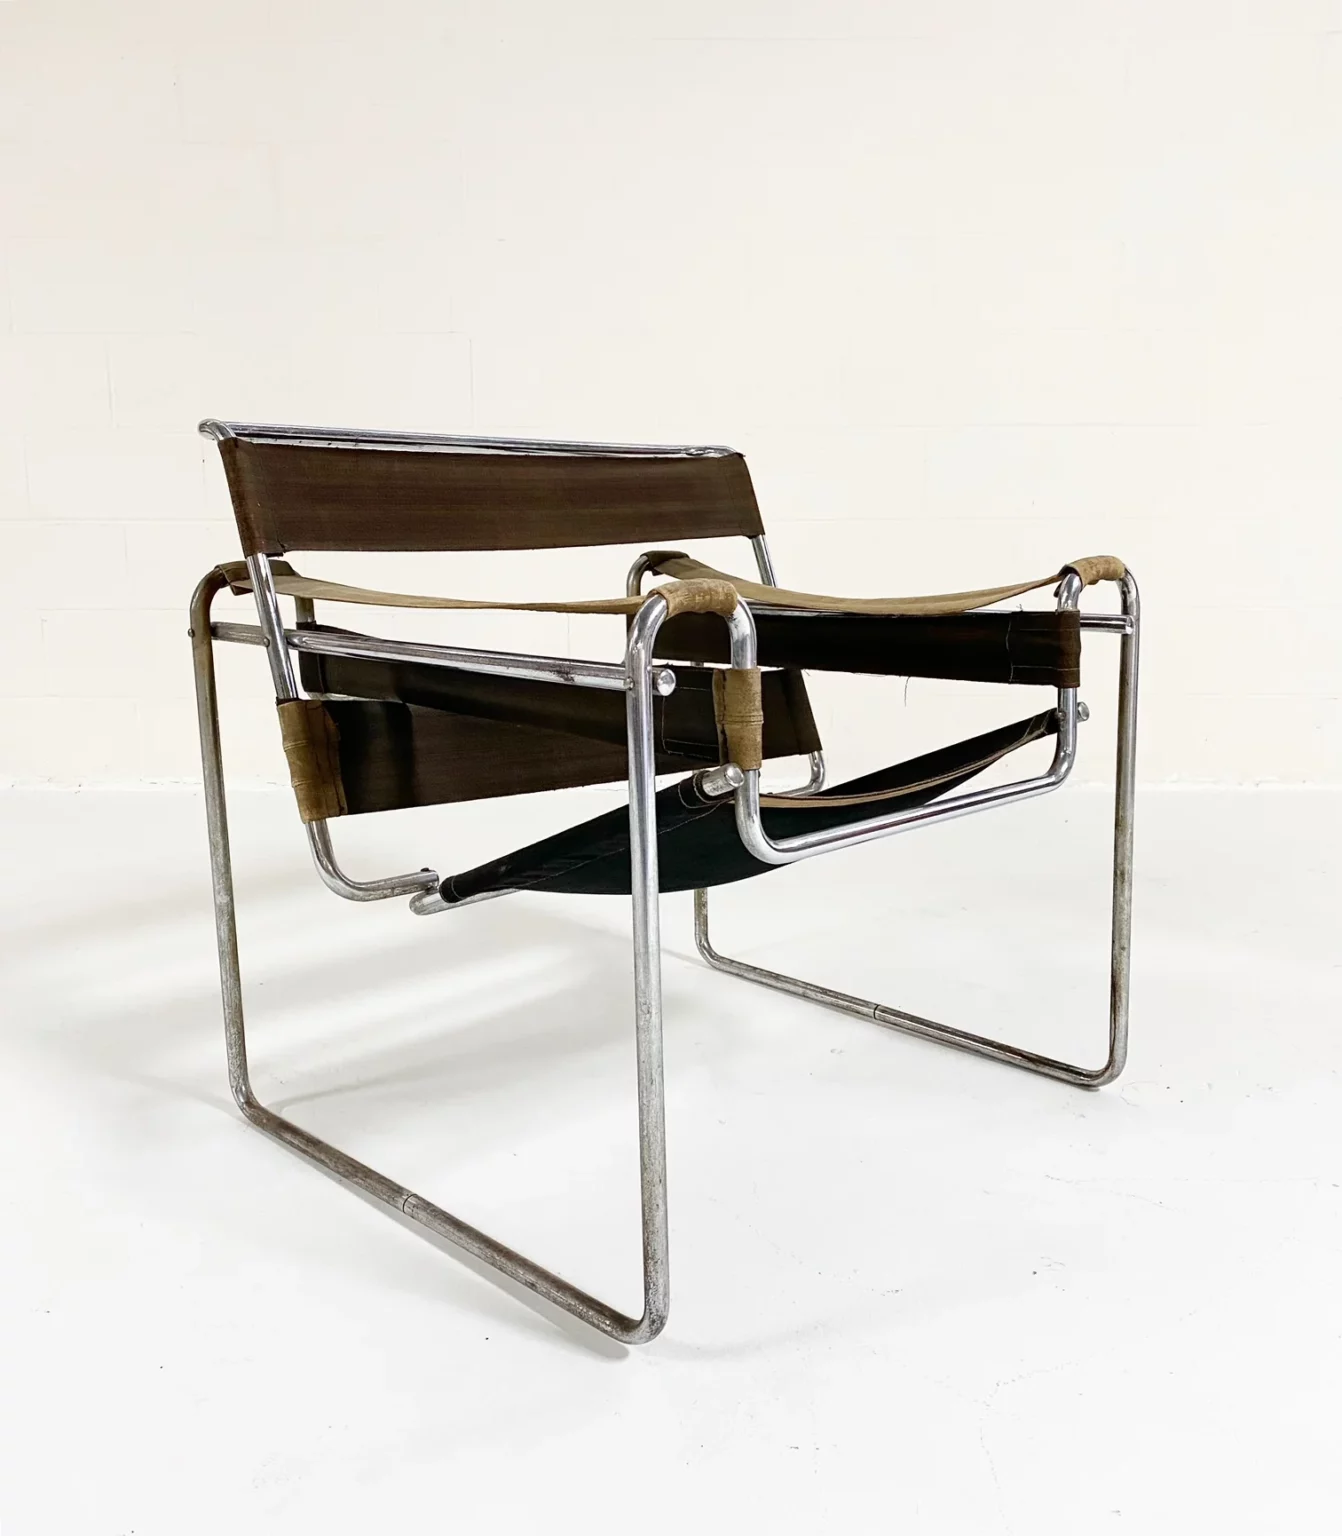 The Wassily Chair Marcel Breuer ENSEMBL stories Iconic deisgns